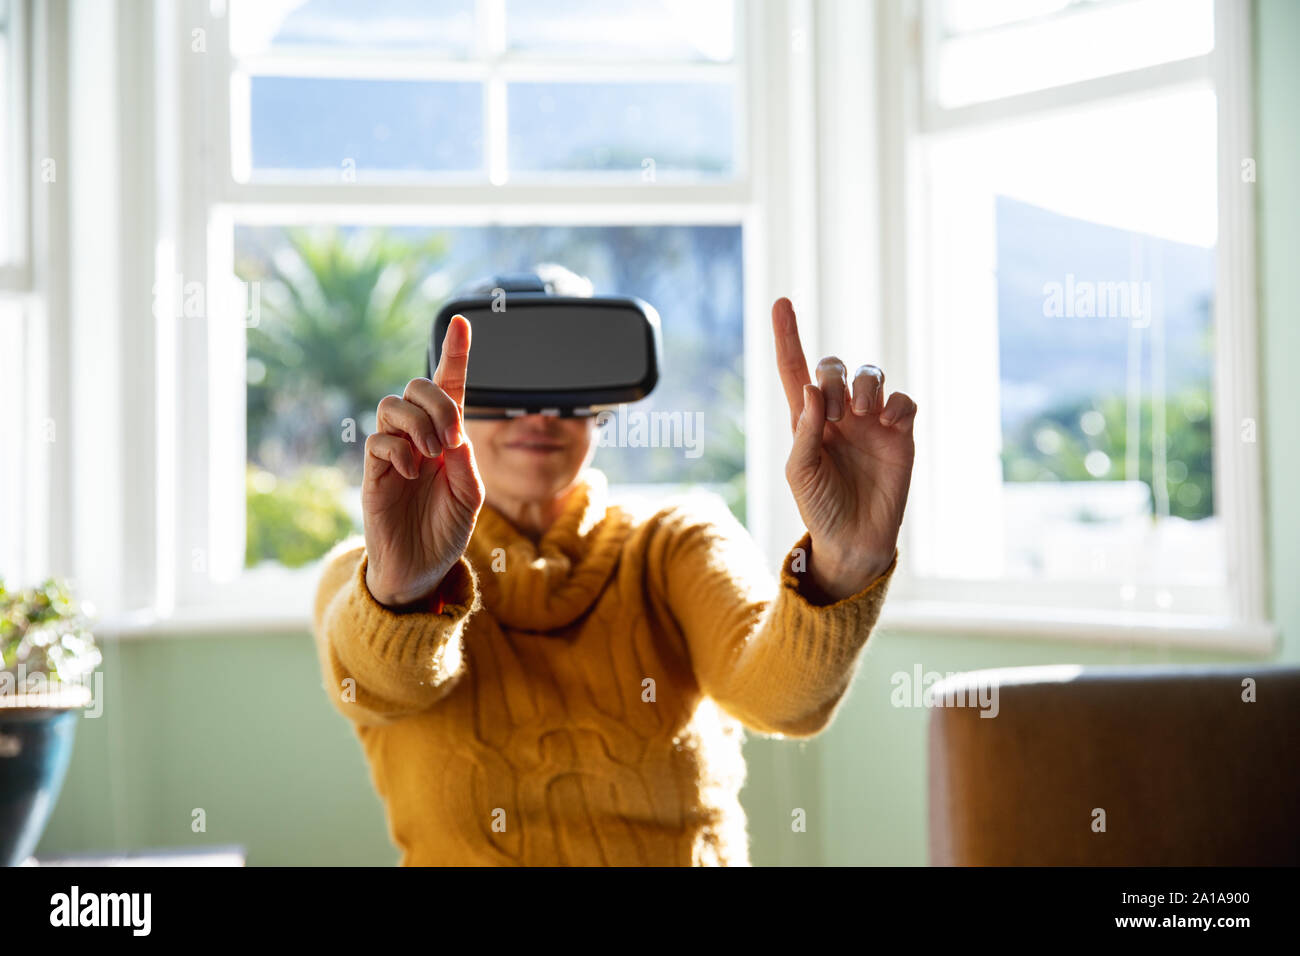 Mature woman alone at home in VR headset Stock Photo - Alamy